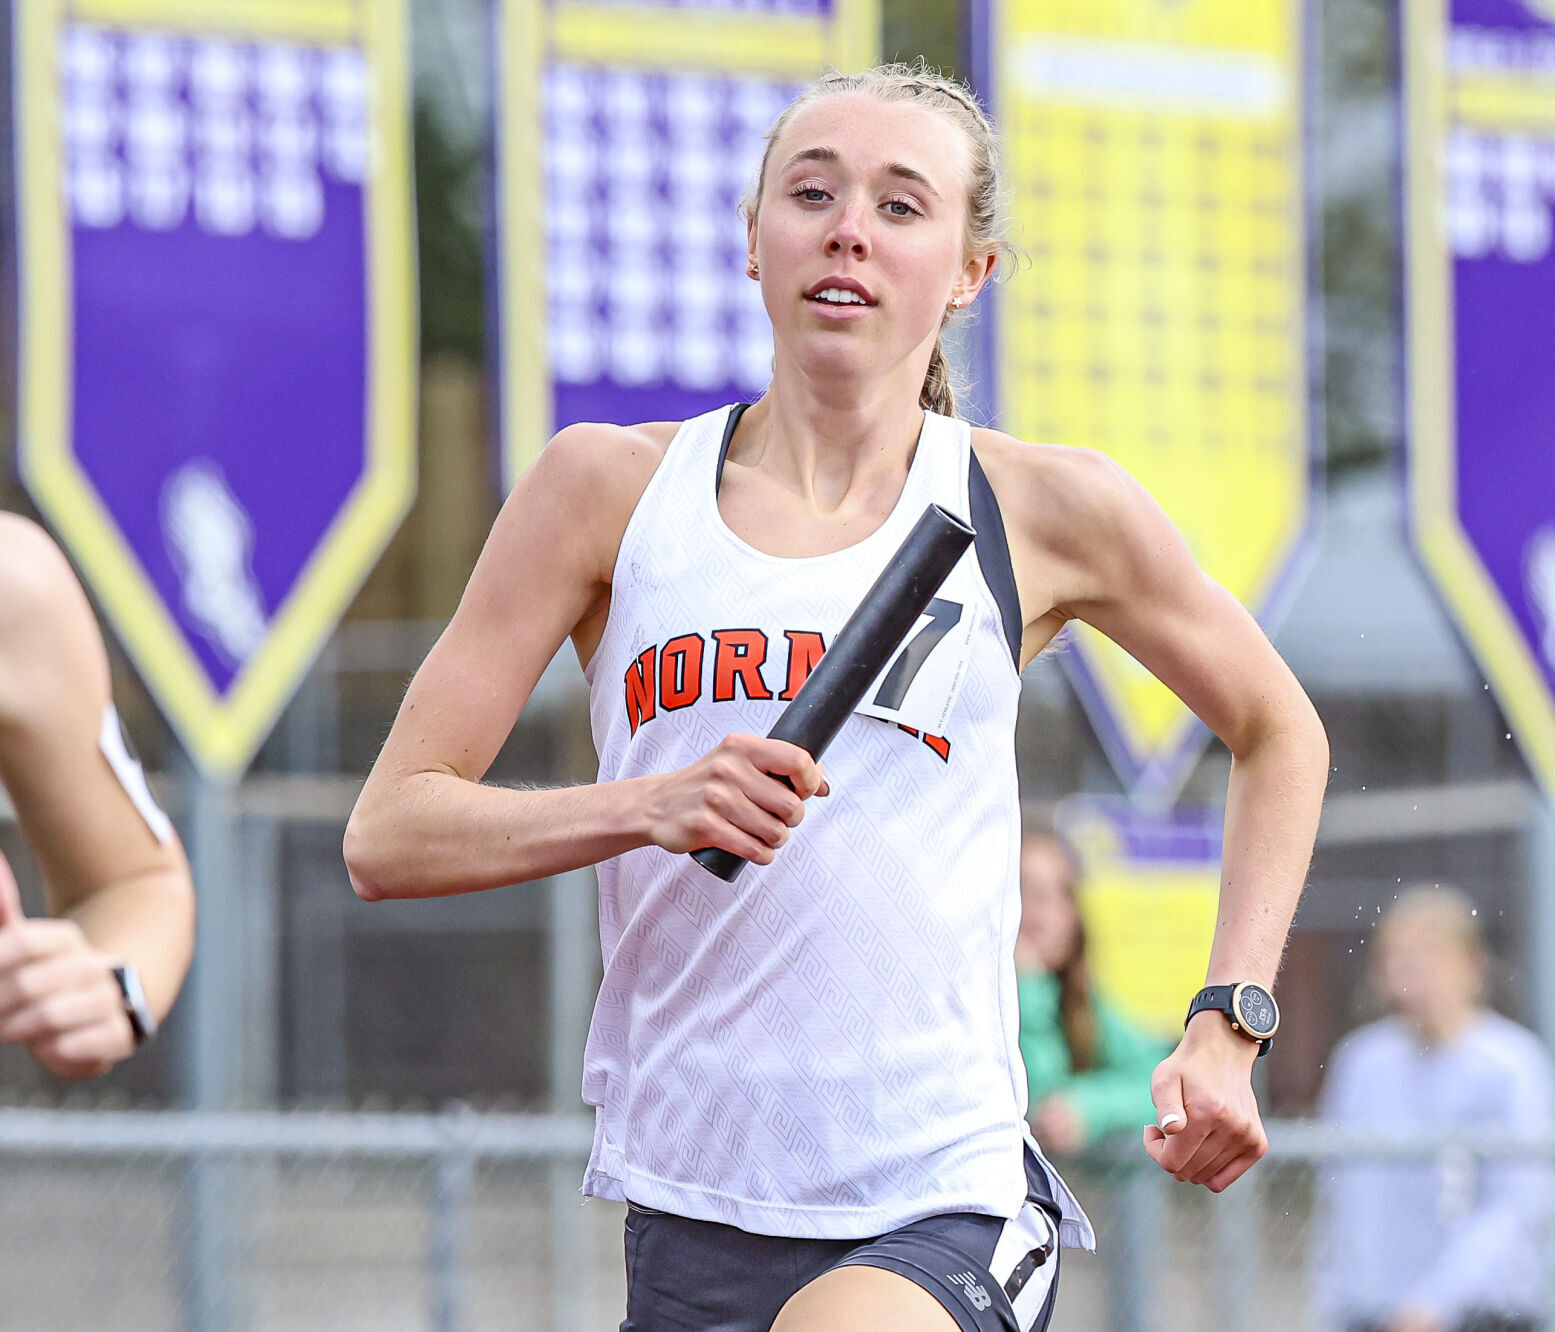 Ince, Lubala win four events; NCHS girls and boys both earn Intercity crowns